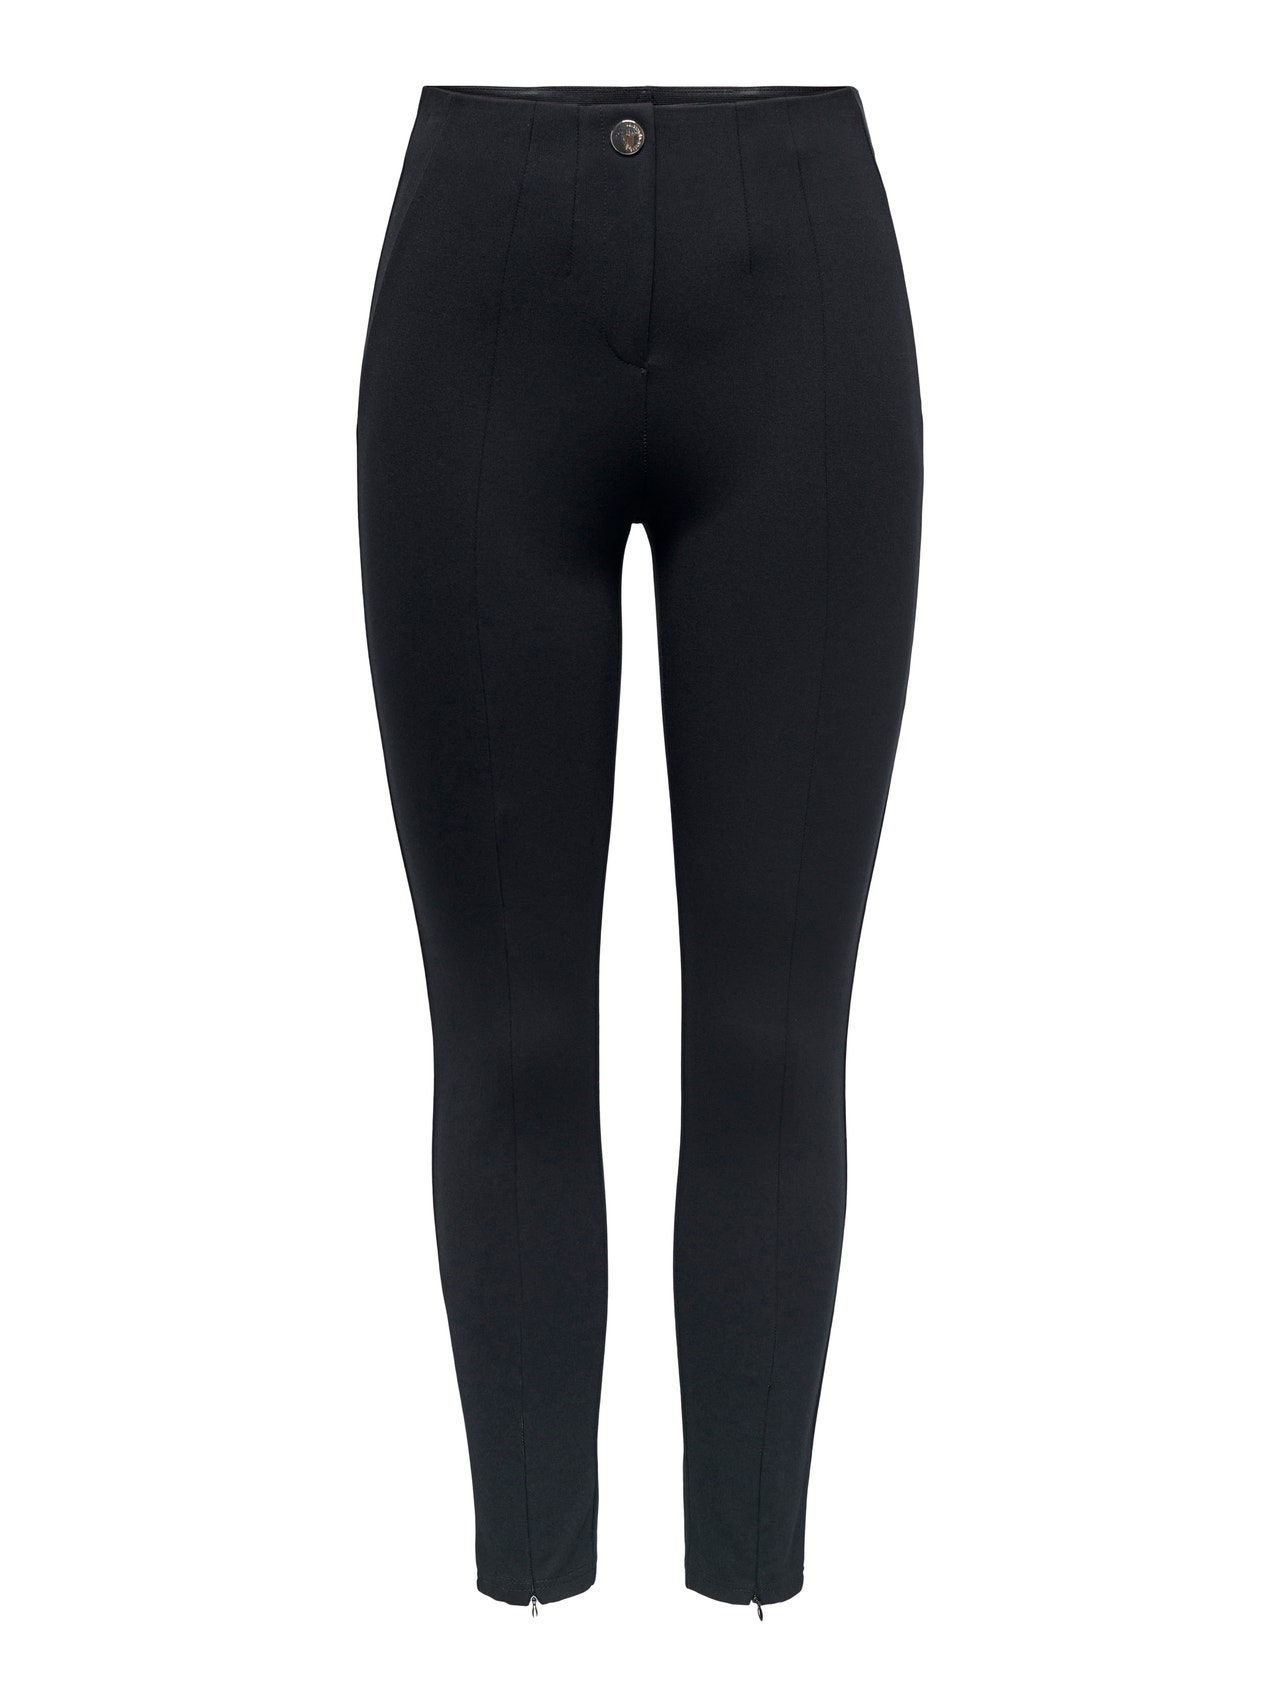 Solid colored Leggings with 60% discount!